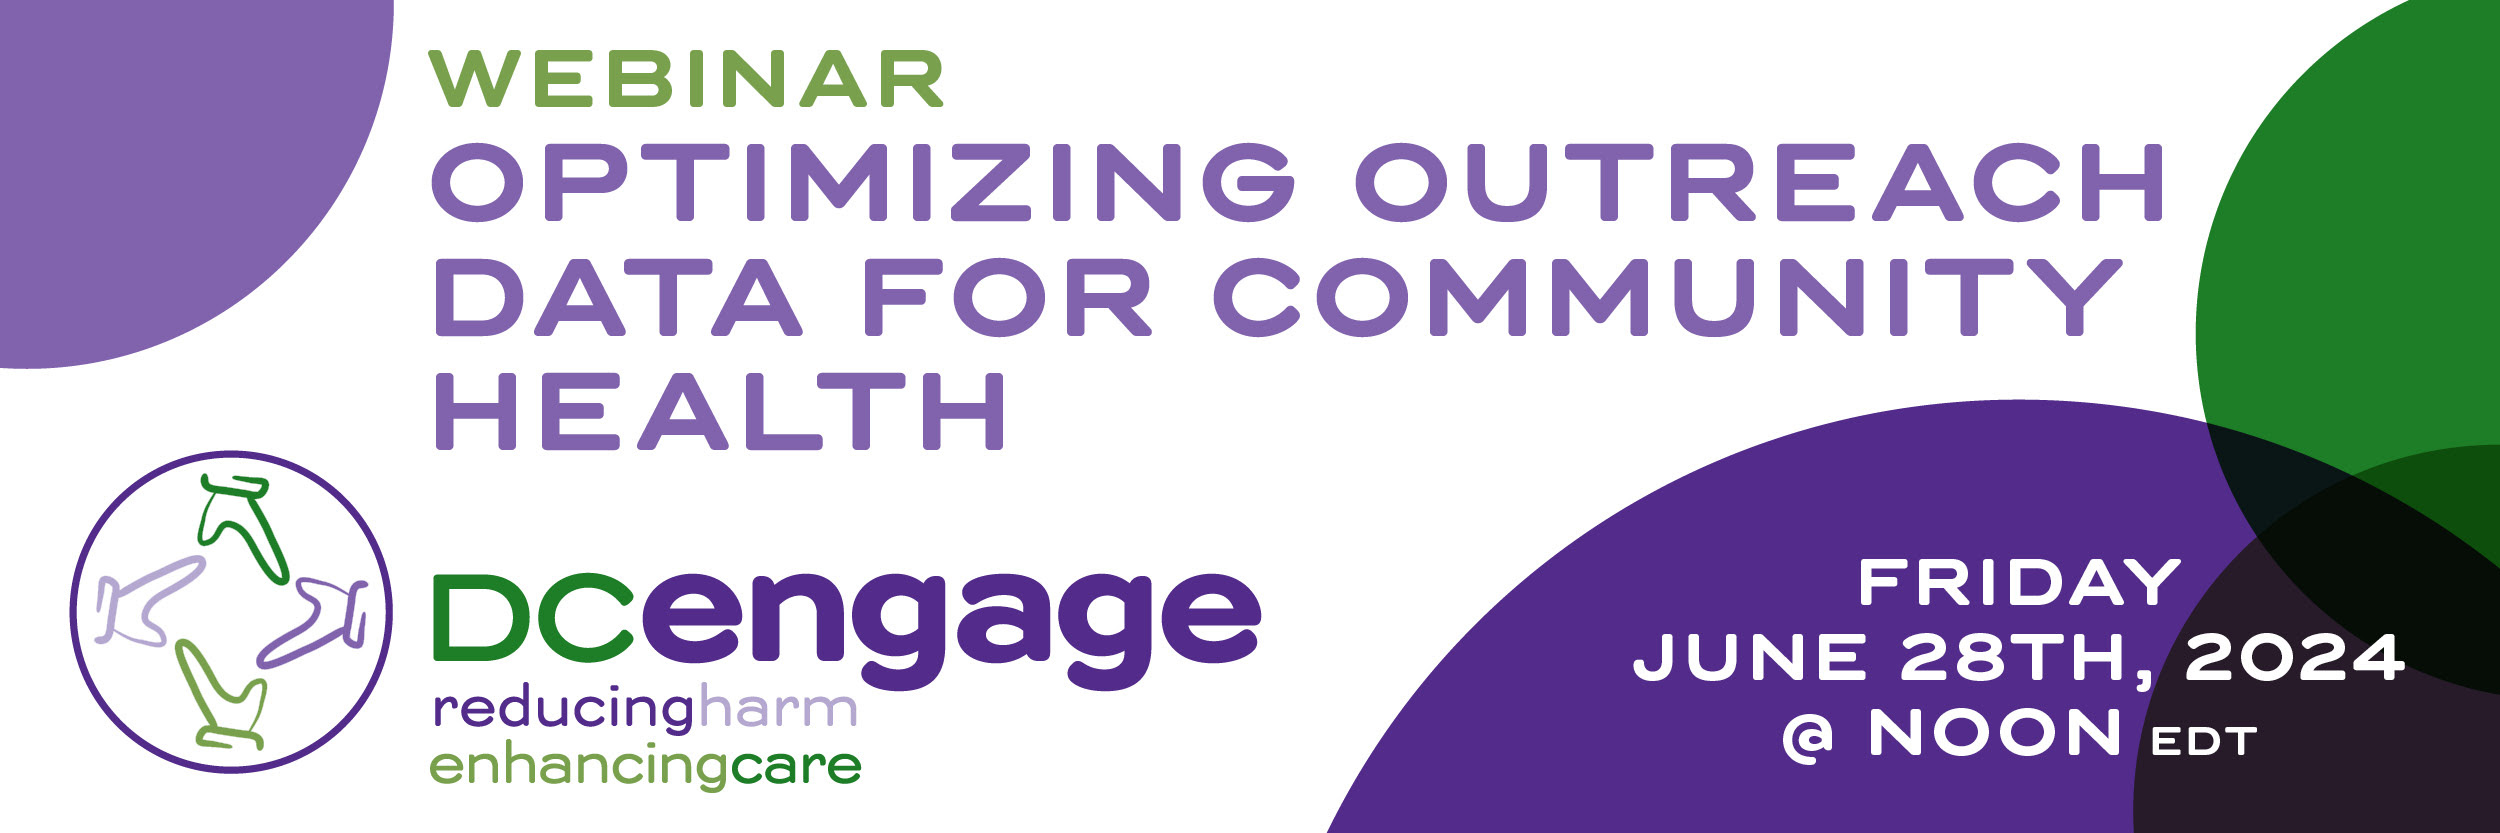 DC Engage Logo with text Optimizing Outreach Data for Community Health.